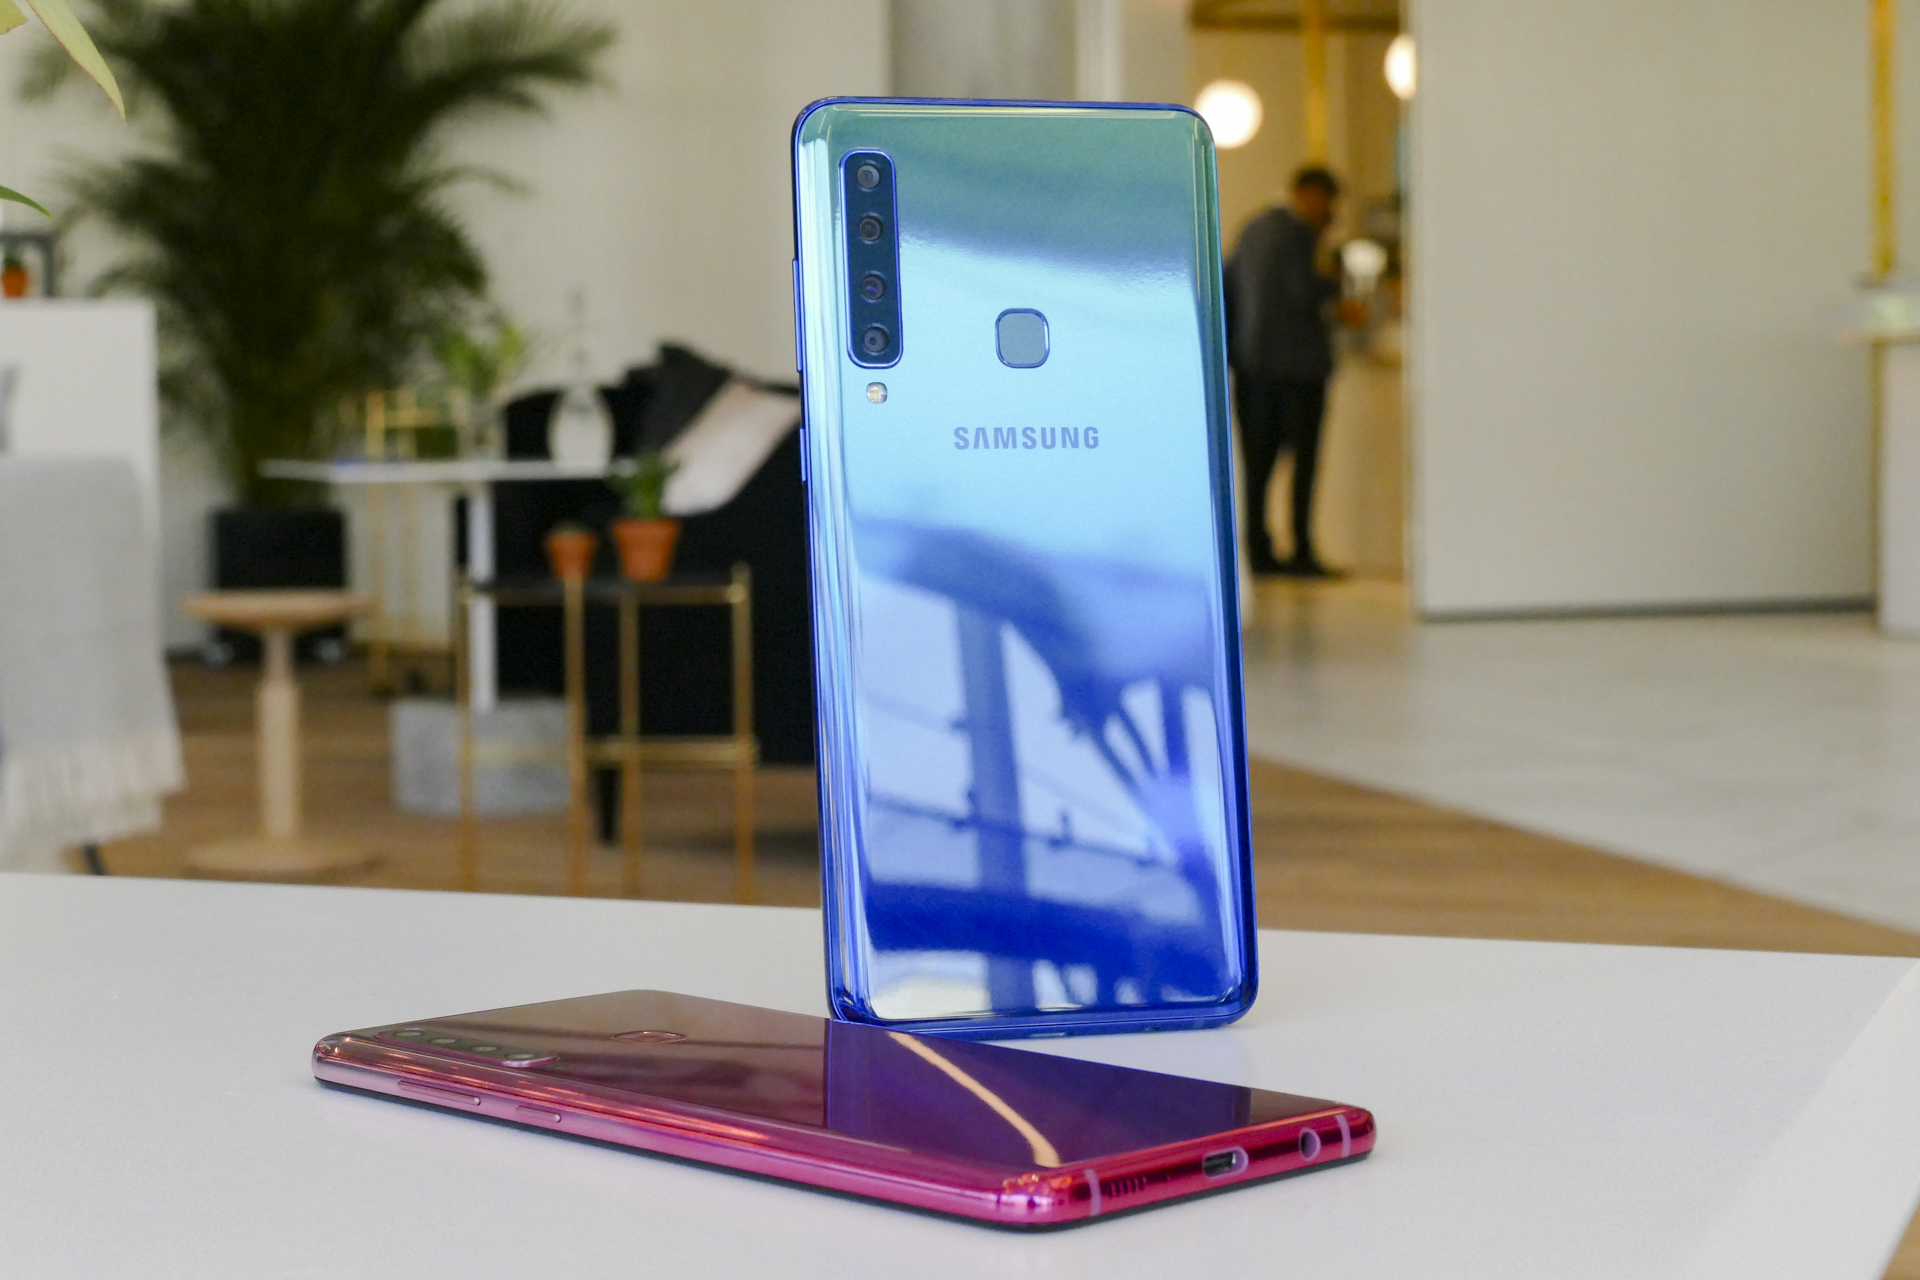 Samsung Galaxy A9 review: more than the sum of its four cameras?